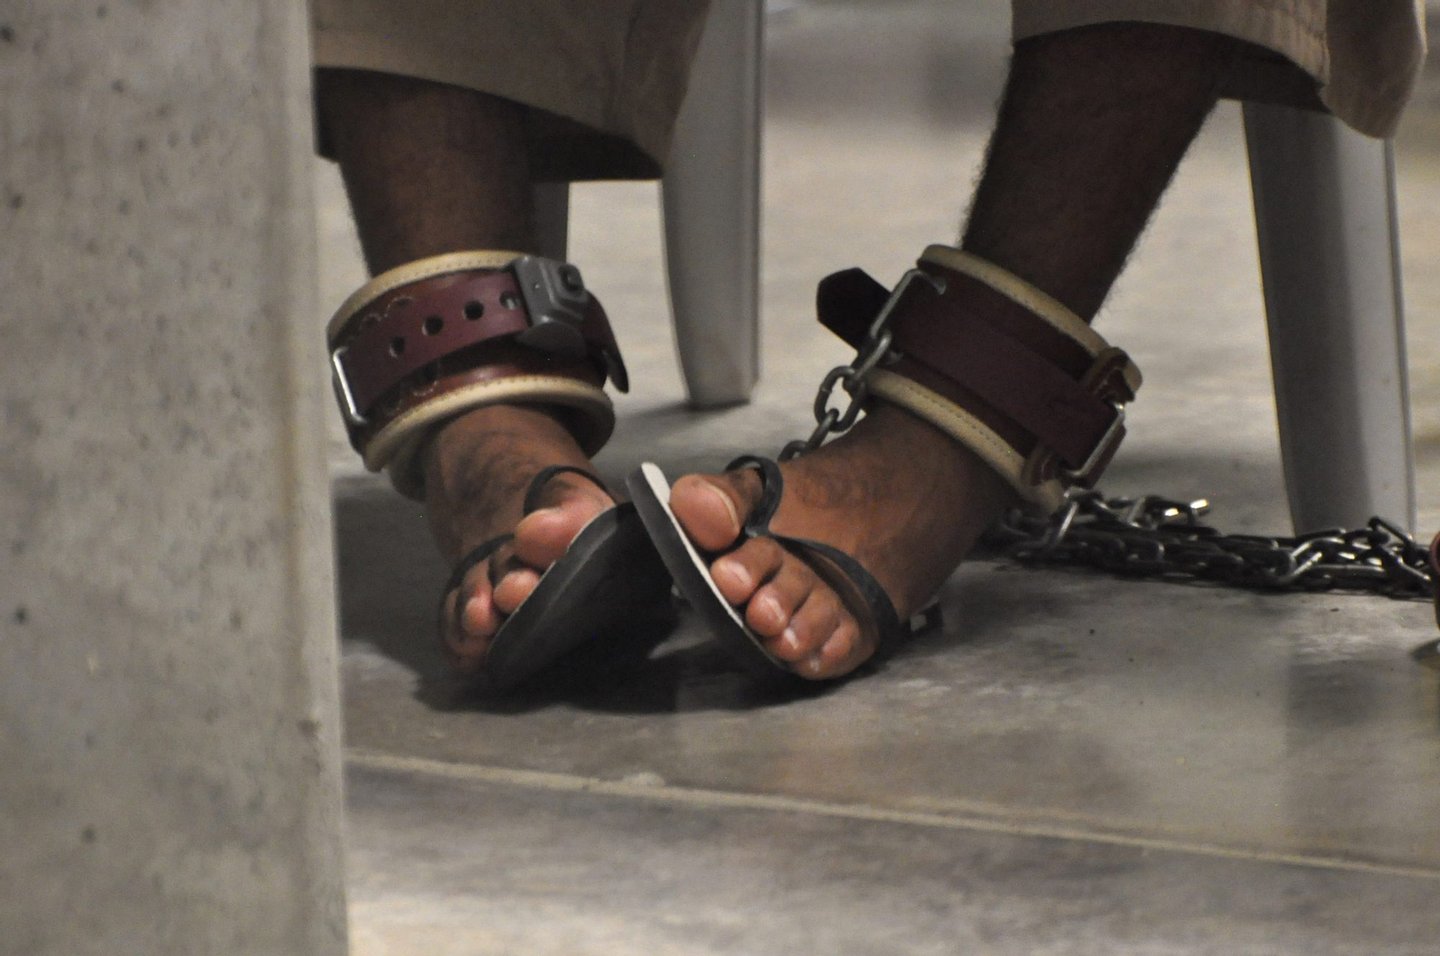 In this photo, reviewed by a US Department of Defense official, a Guantanamo detainee's feet are shackled to the floor as he attends a "Life Skills" class inside the Camp 6 high-security detention facility at Guantanamo Bay US Naval Base, Cuba, on April 27, 2009. Canadian Guantanamo detainee Omar Khadr facing a US military tribunal for alleged war crimes has reportedly turned down a plea offer that would have meant five years in prison. POOL/Michelle Shephard = IMAGE REVIEWED BY THE US DEPARTMENT OF DEFENSE = (Photo credit should read MICHELLE SHEPHARD/AFP/Getty Images)